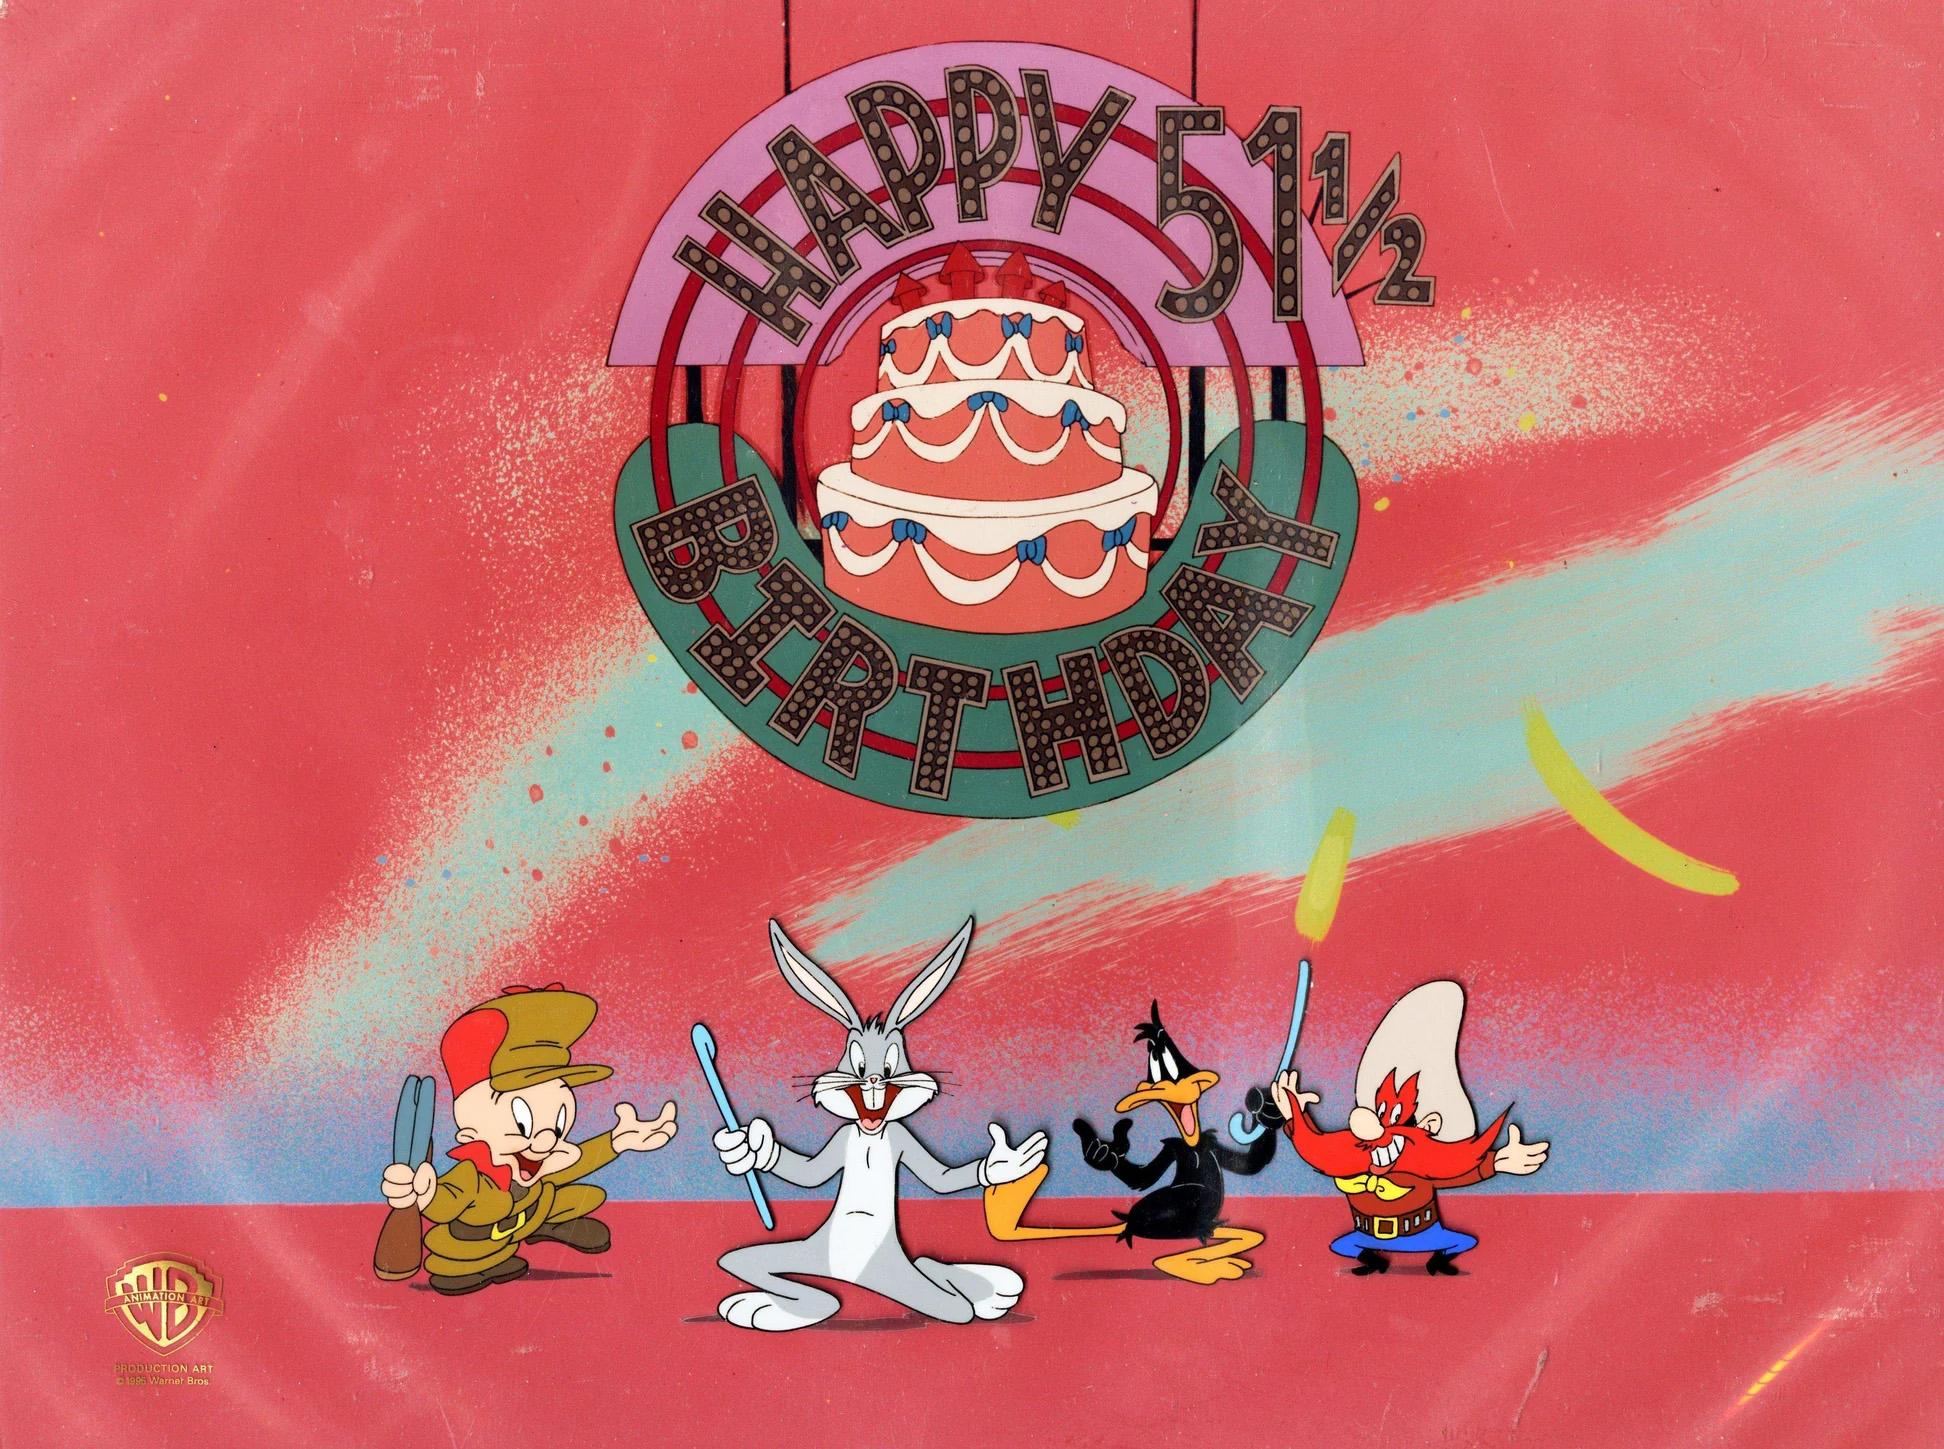 Looney Tunes Original Production Cel: Happy 51 1/2 Birthday from (Blooper) Bunny - Art by Bob and Ruth Clampett